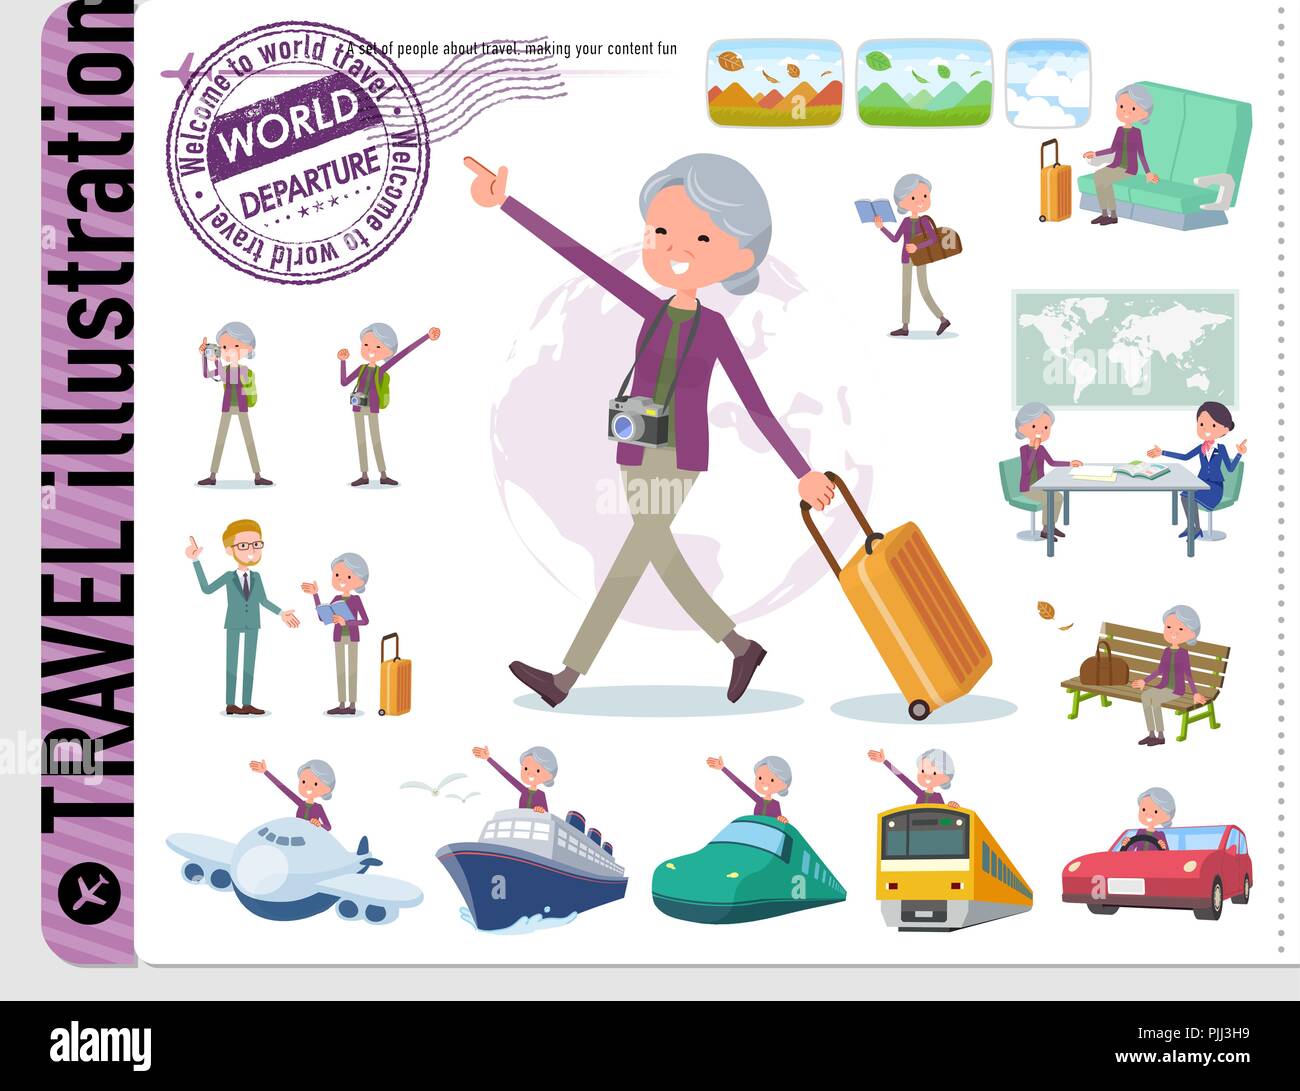 A set of old women on travel.There are also vehicles such as boats and airplanes.It's vector art so it's easy to edit. Stock Vector